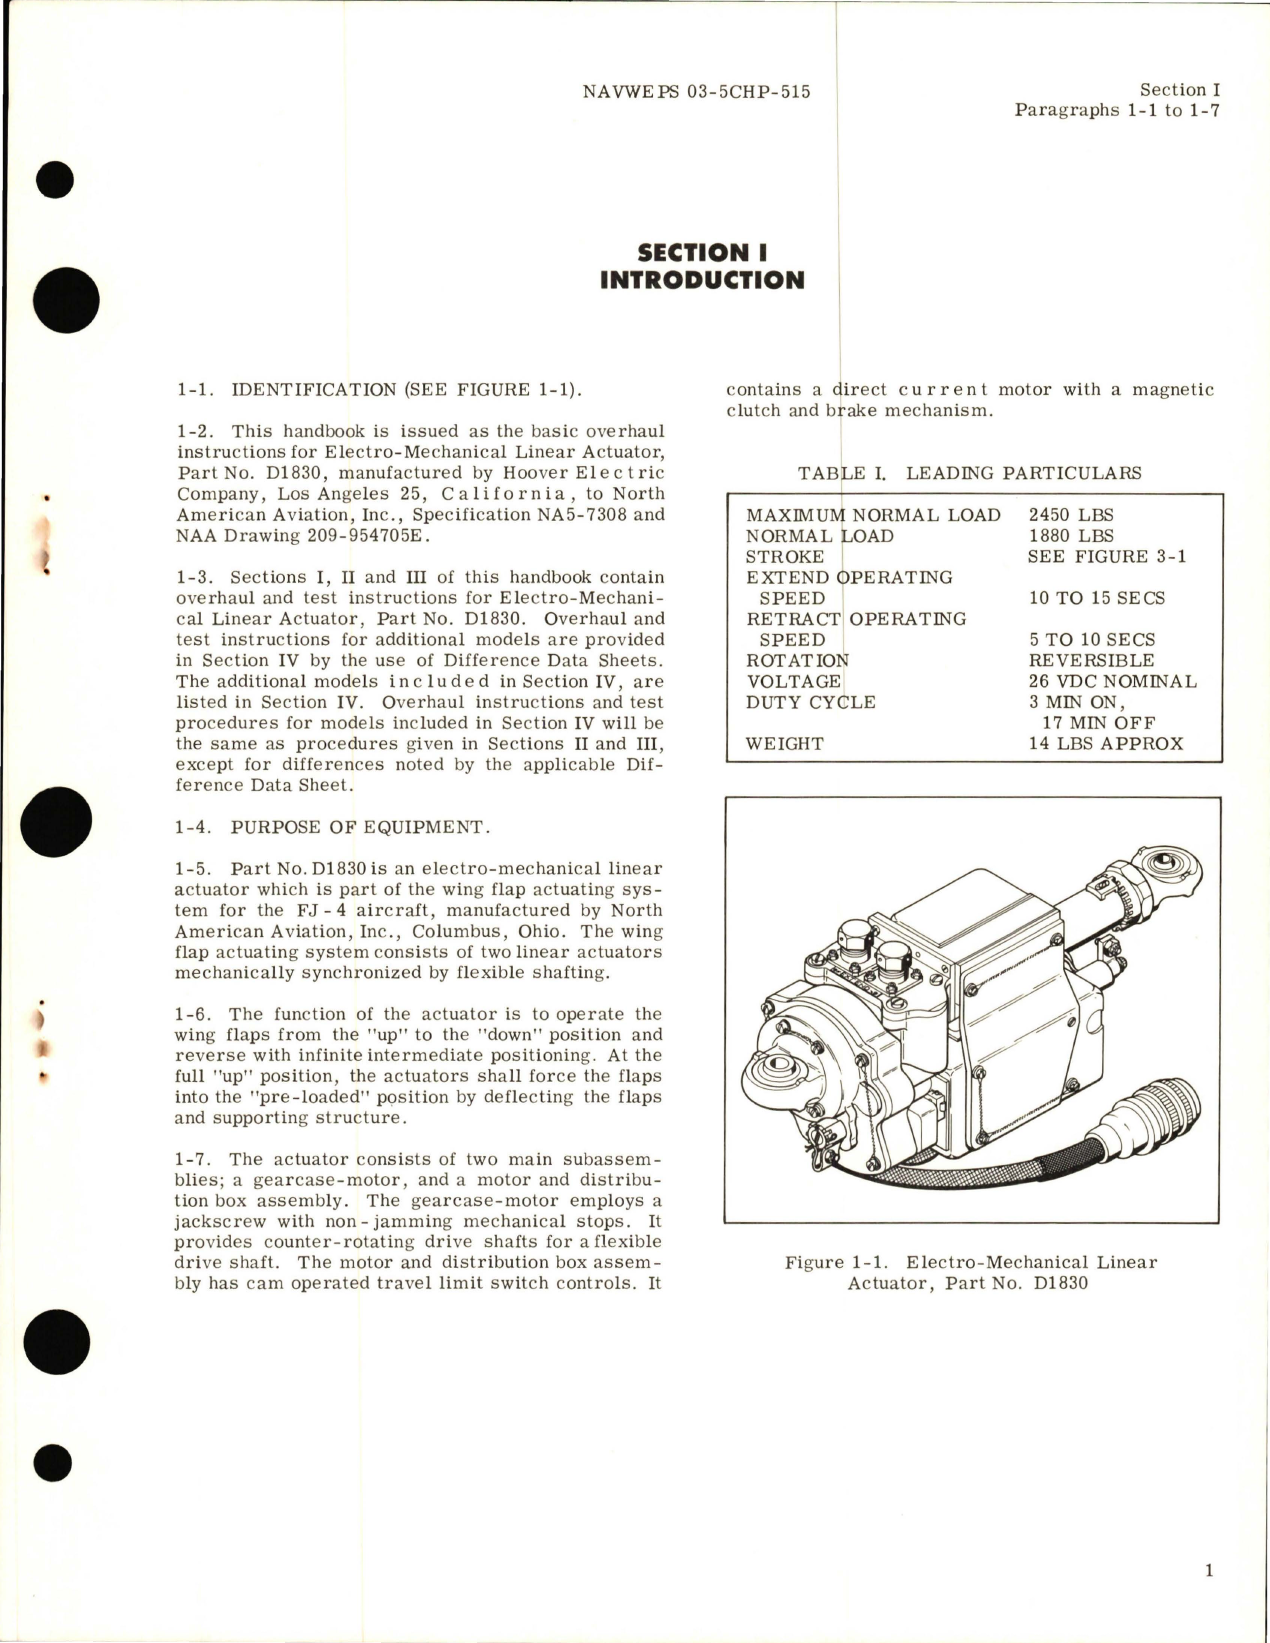 Sample page 5 from AirCorps Library document: Overhaul Instructions for Electro-Mechanical Linear Actuator Parts D1830 and D1830-2